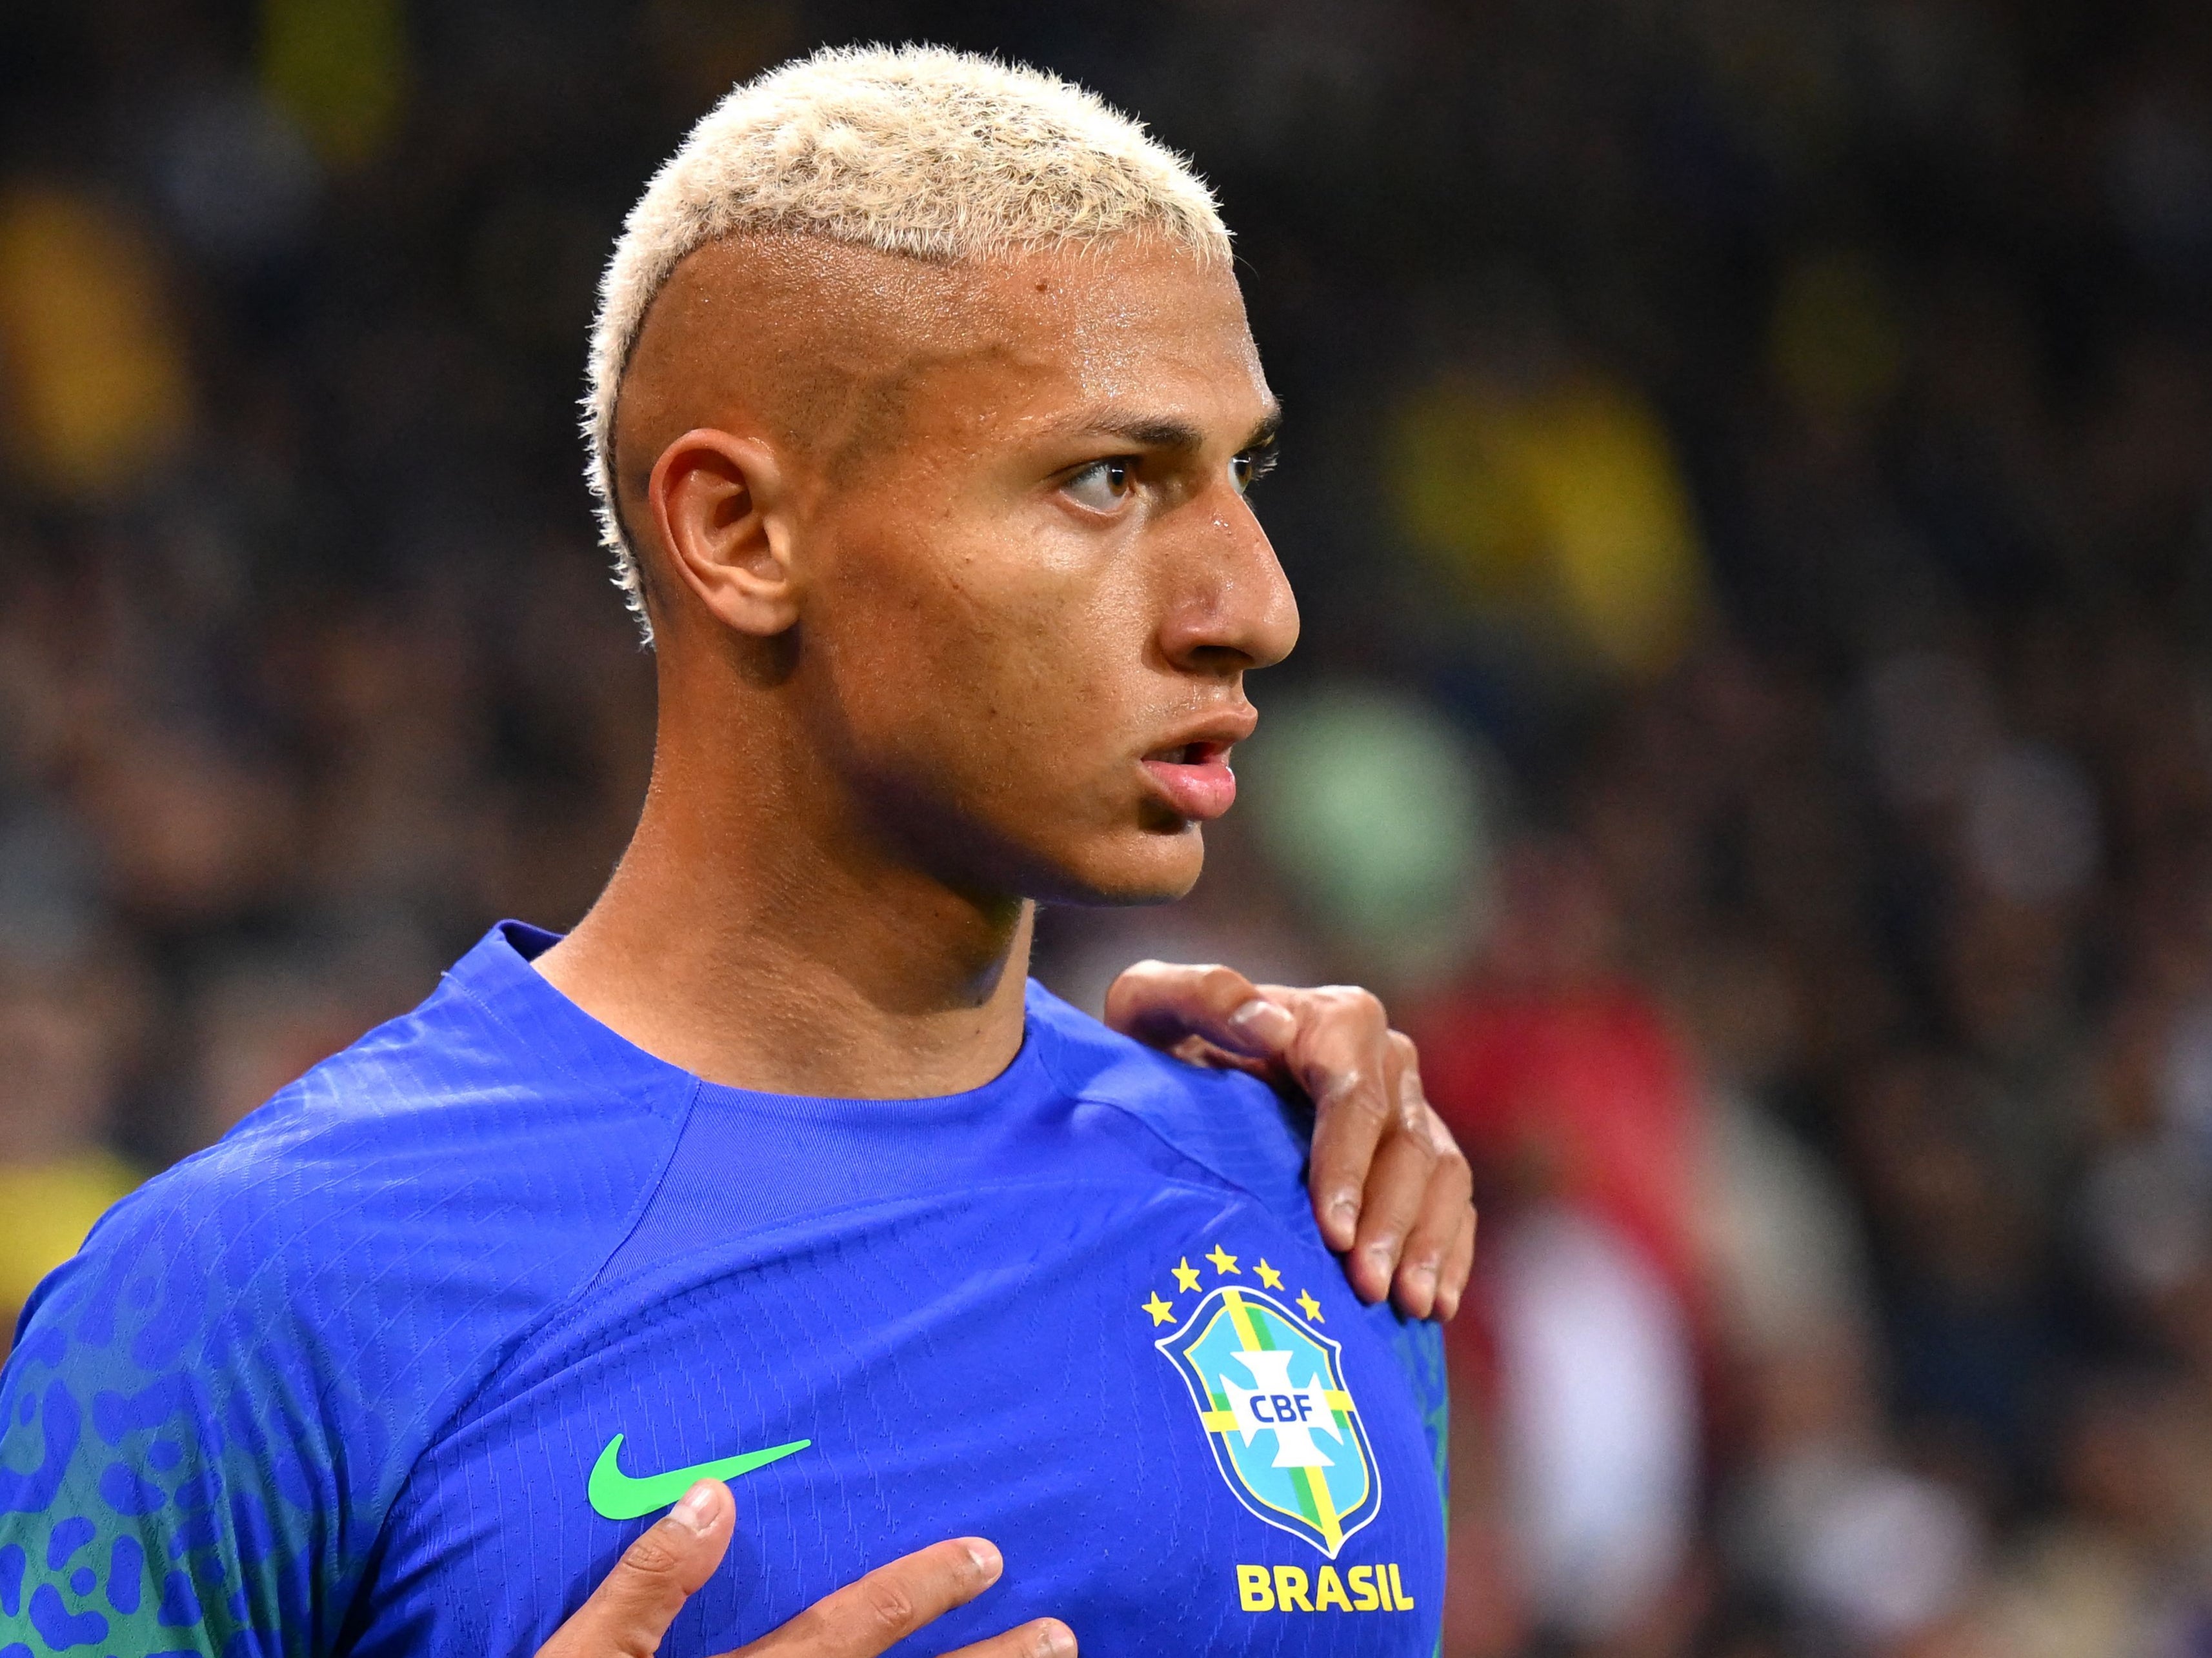 Richarlison scored Brazil’s second goal in their 5-1 win against Tunisia and had a banana thrown at him while he celebrated